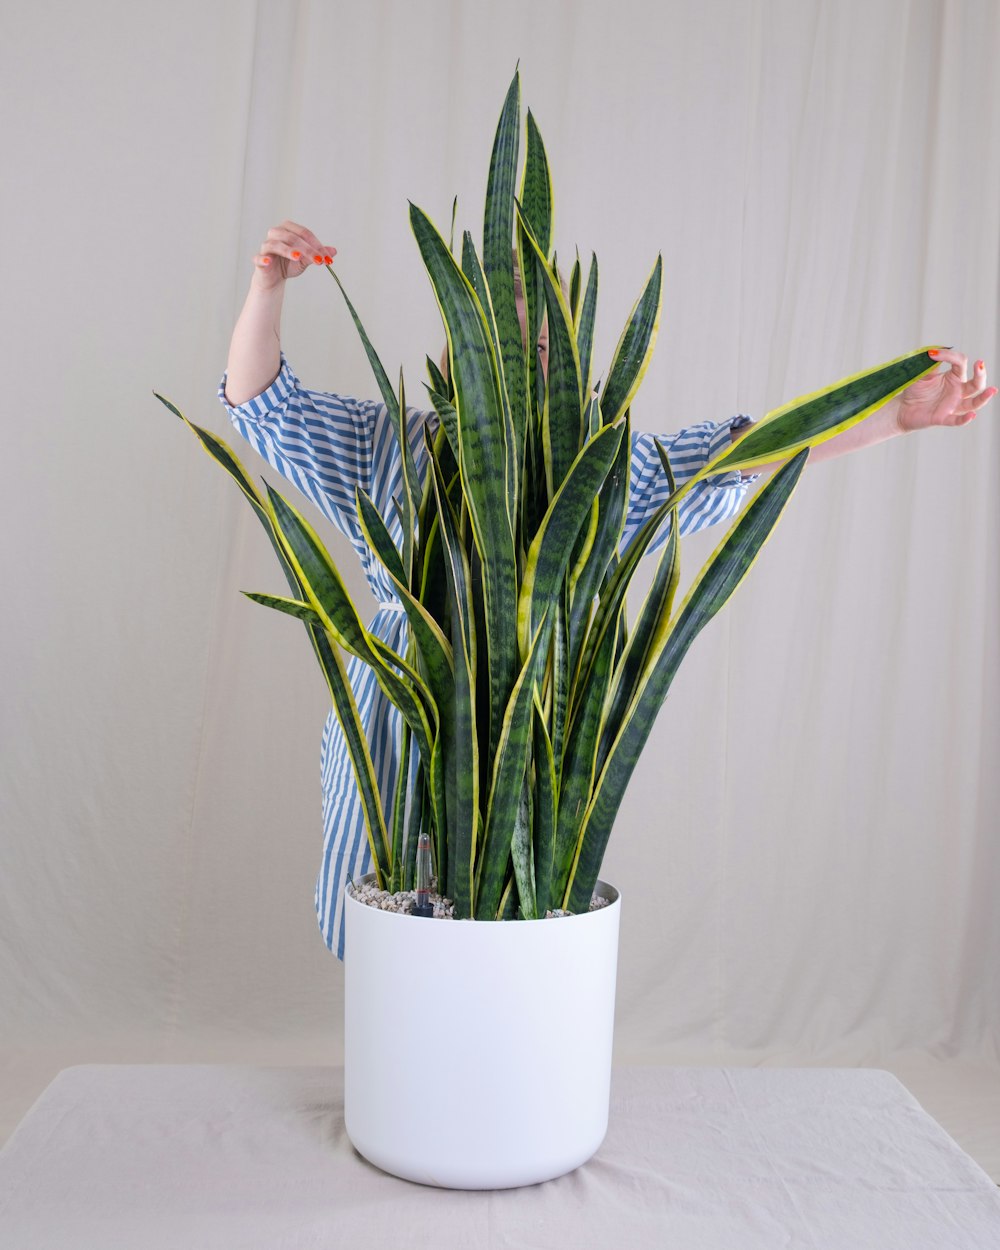 a woman standing behind a potted plant on a table